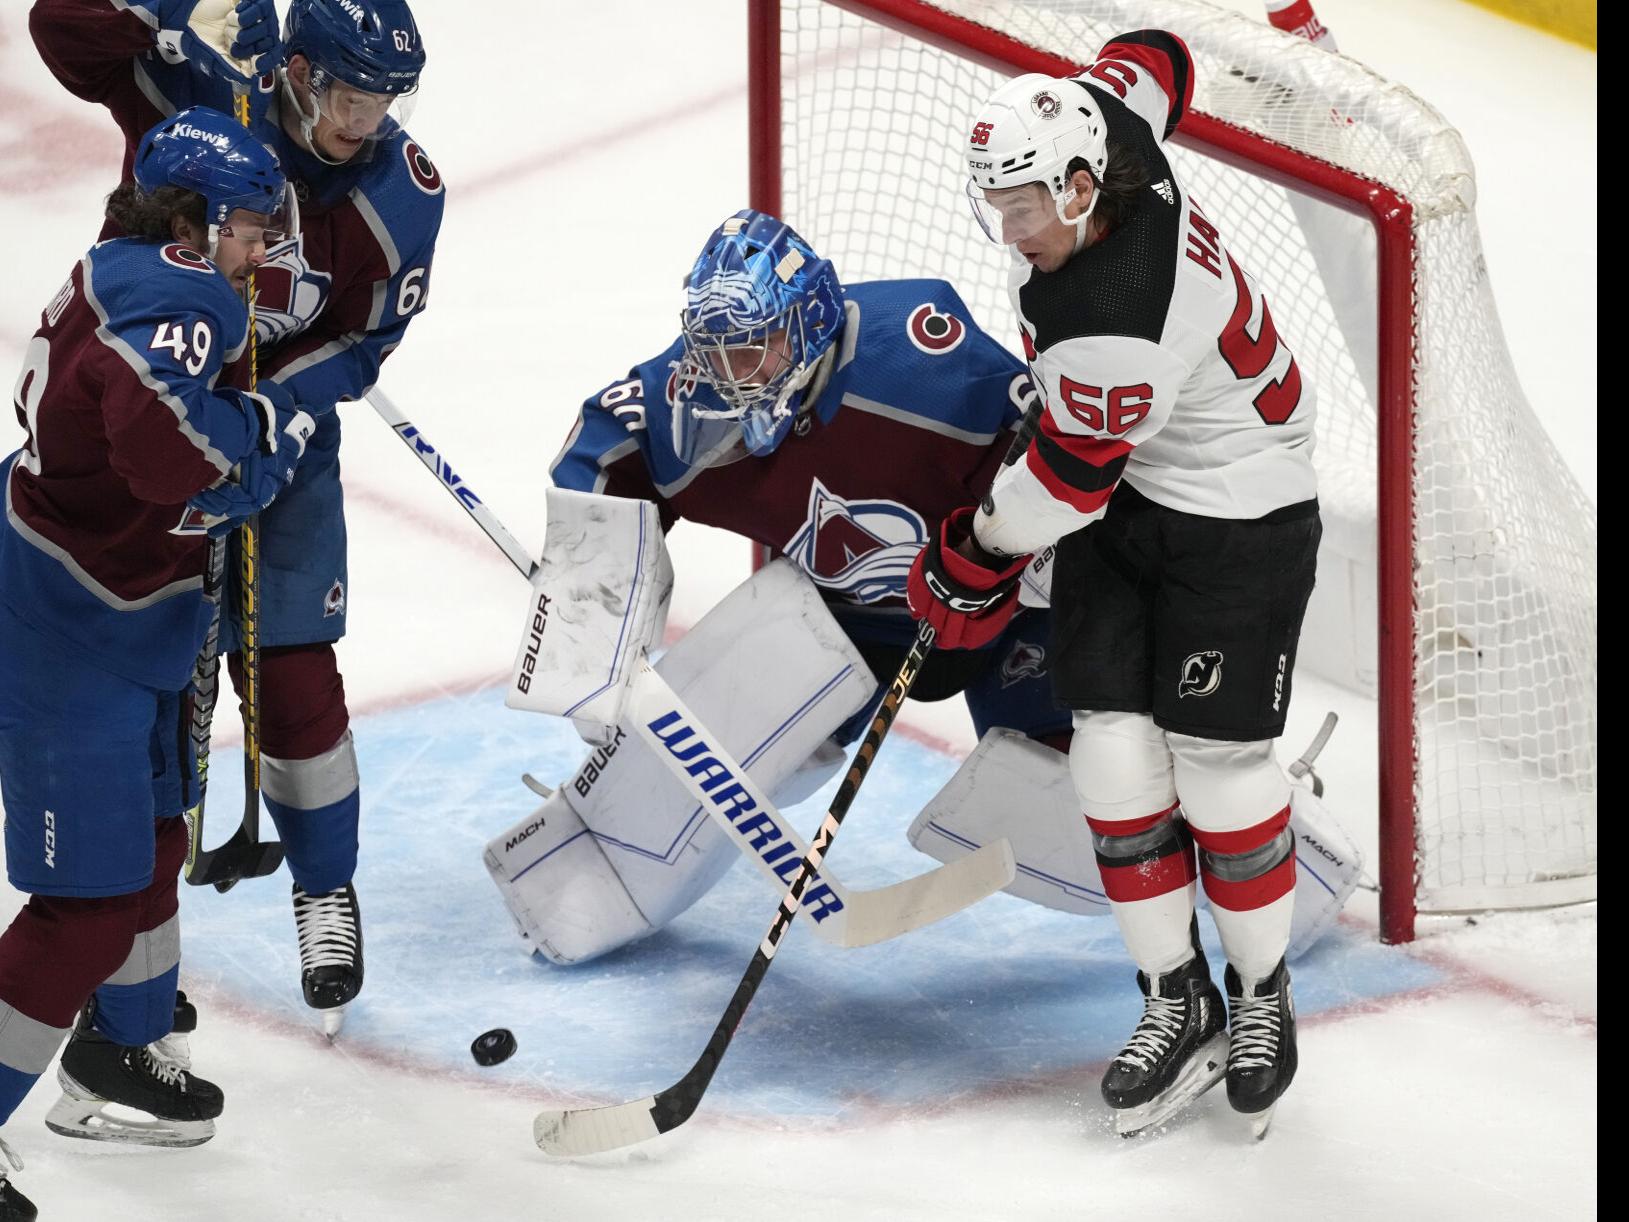 Lopsided loss to Avalanche puts dent in Wild's recent progress